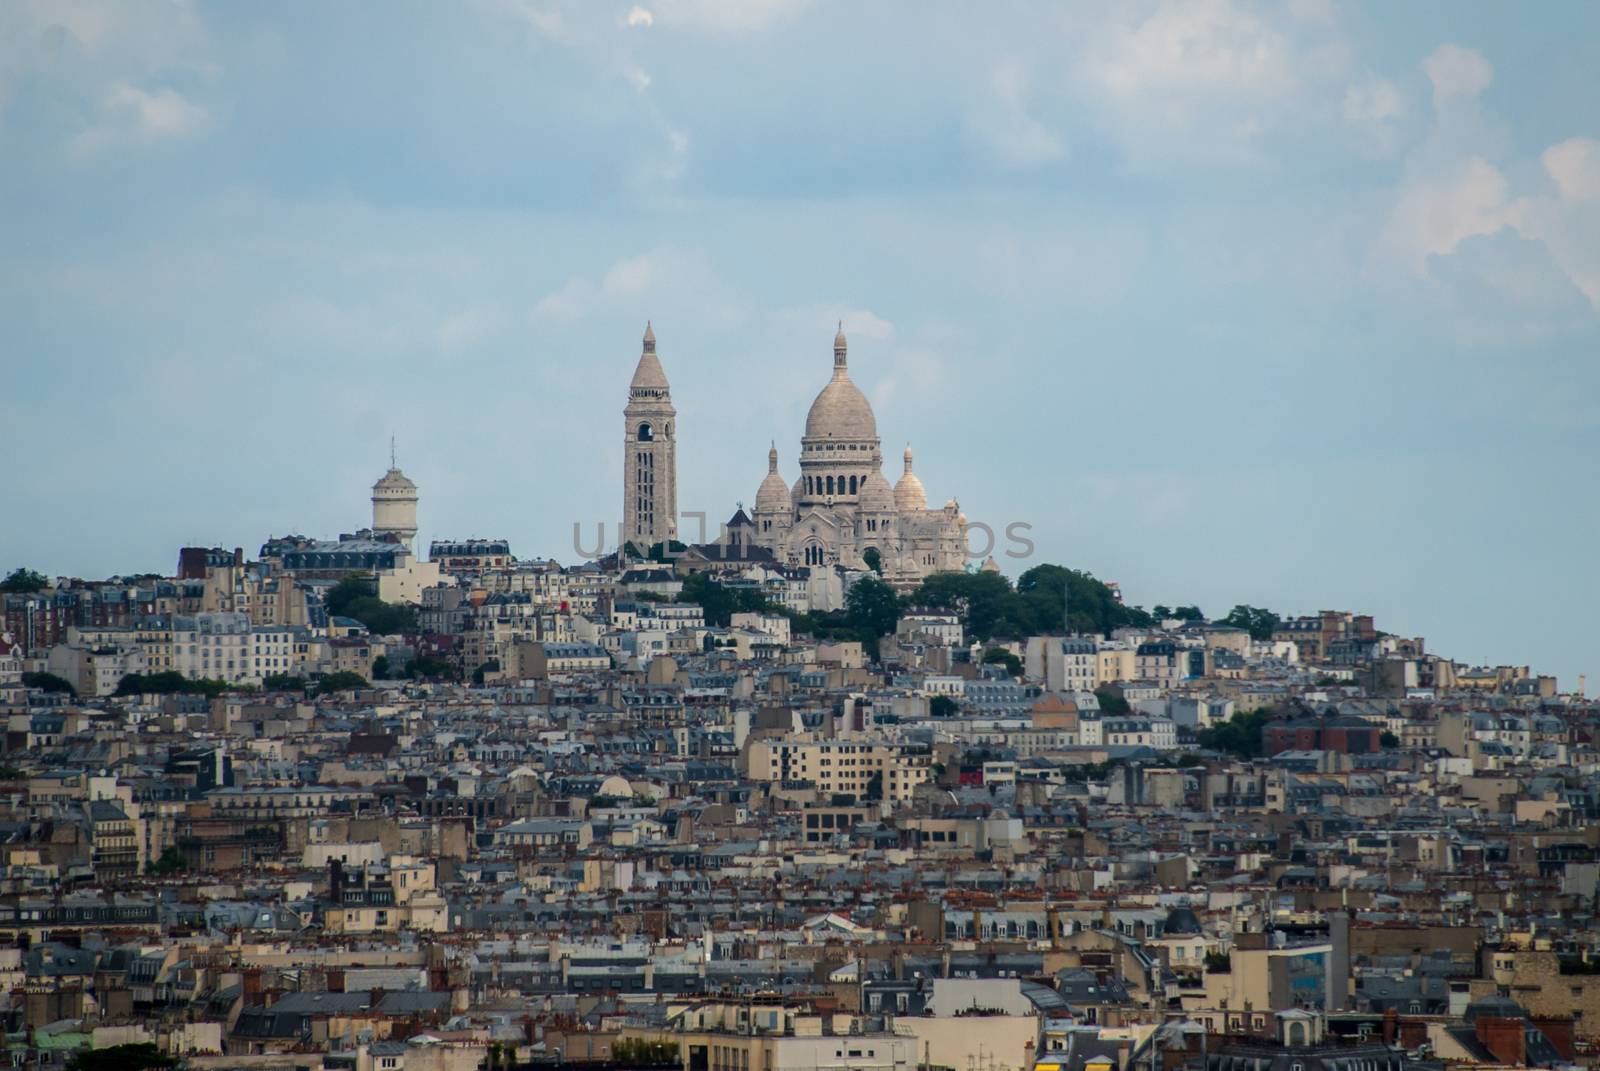 Town of Paris around Sacre Coeur on top of the hill